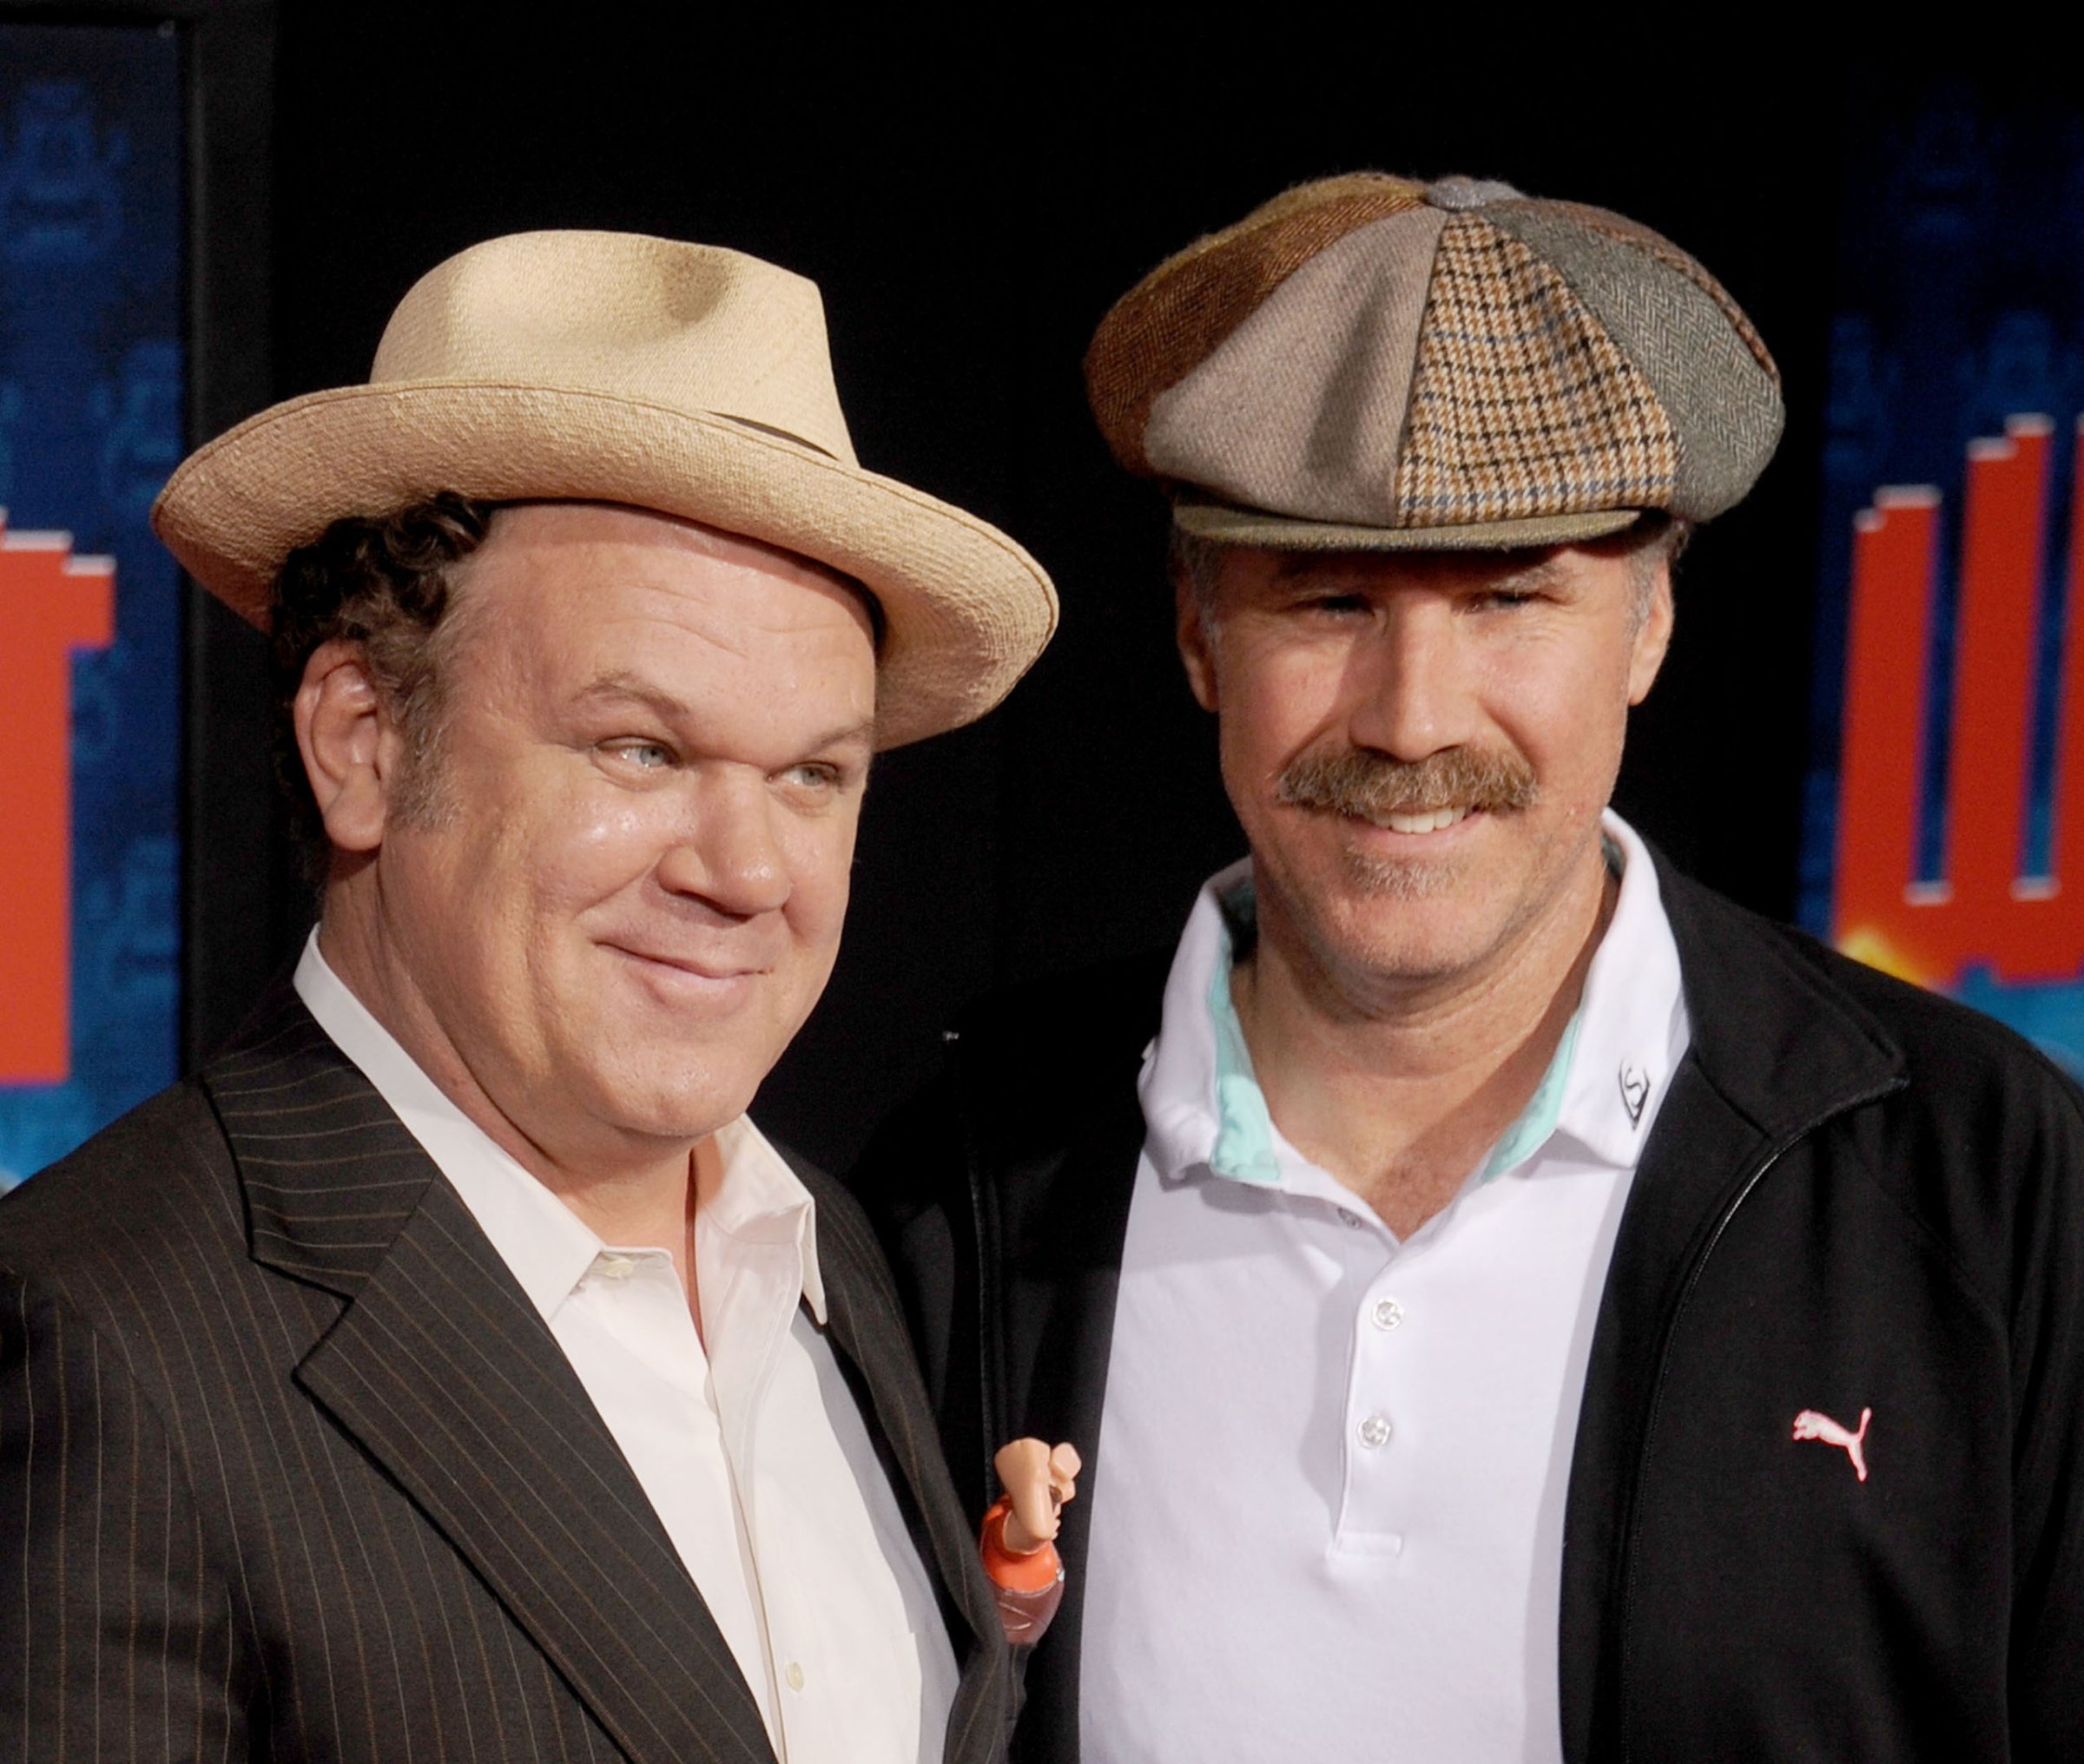 John C. Reilly and Will Ferrell arrive at the Los Angeles premiere of "Wreck-It Ralph" at the El Capitan Theatre in Hollywood, Calif., on Oct. 29, 2012.